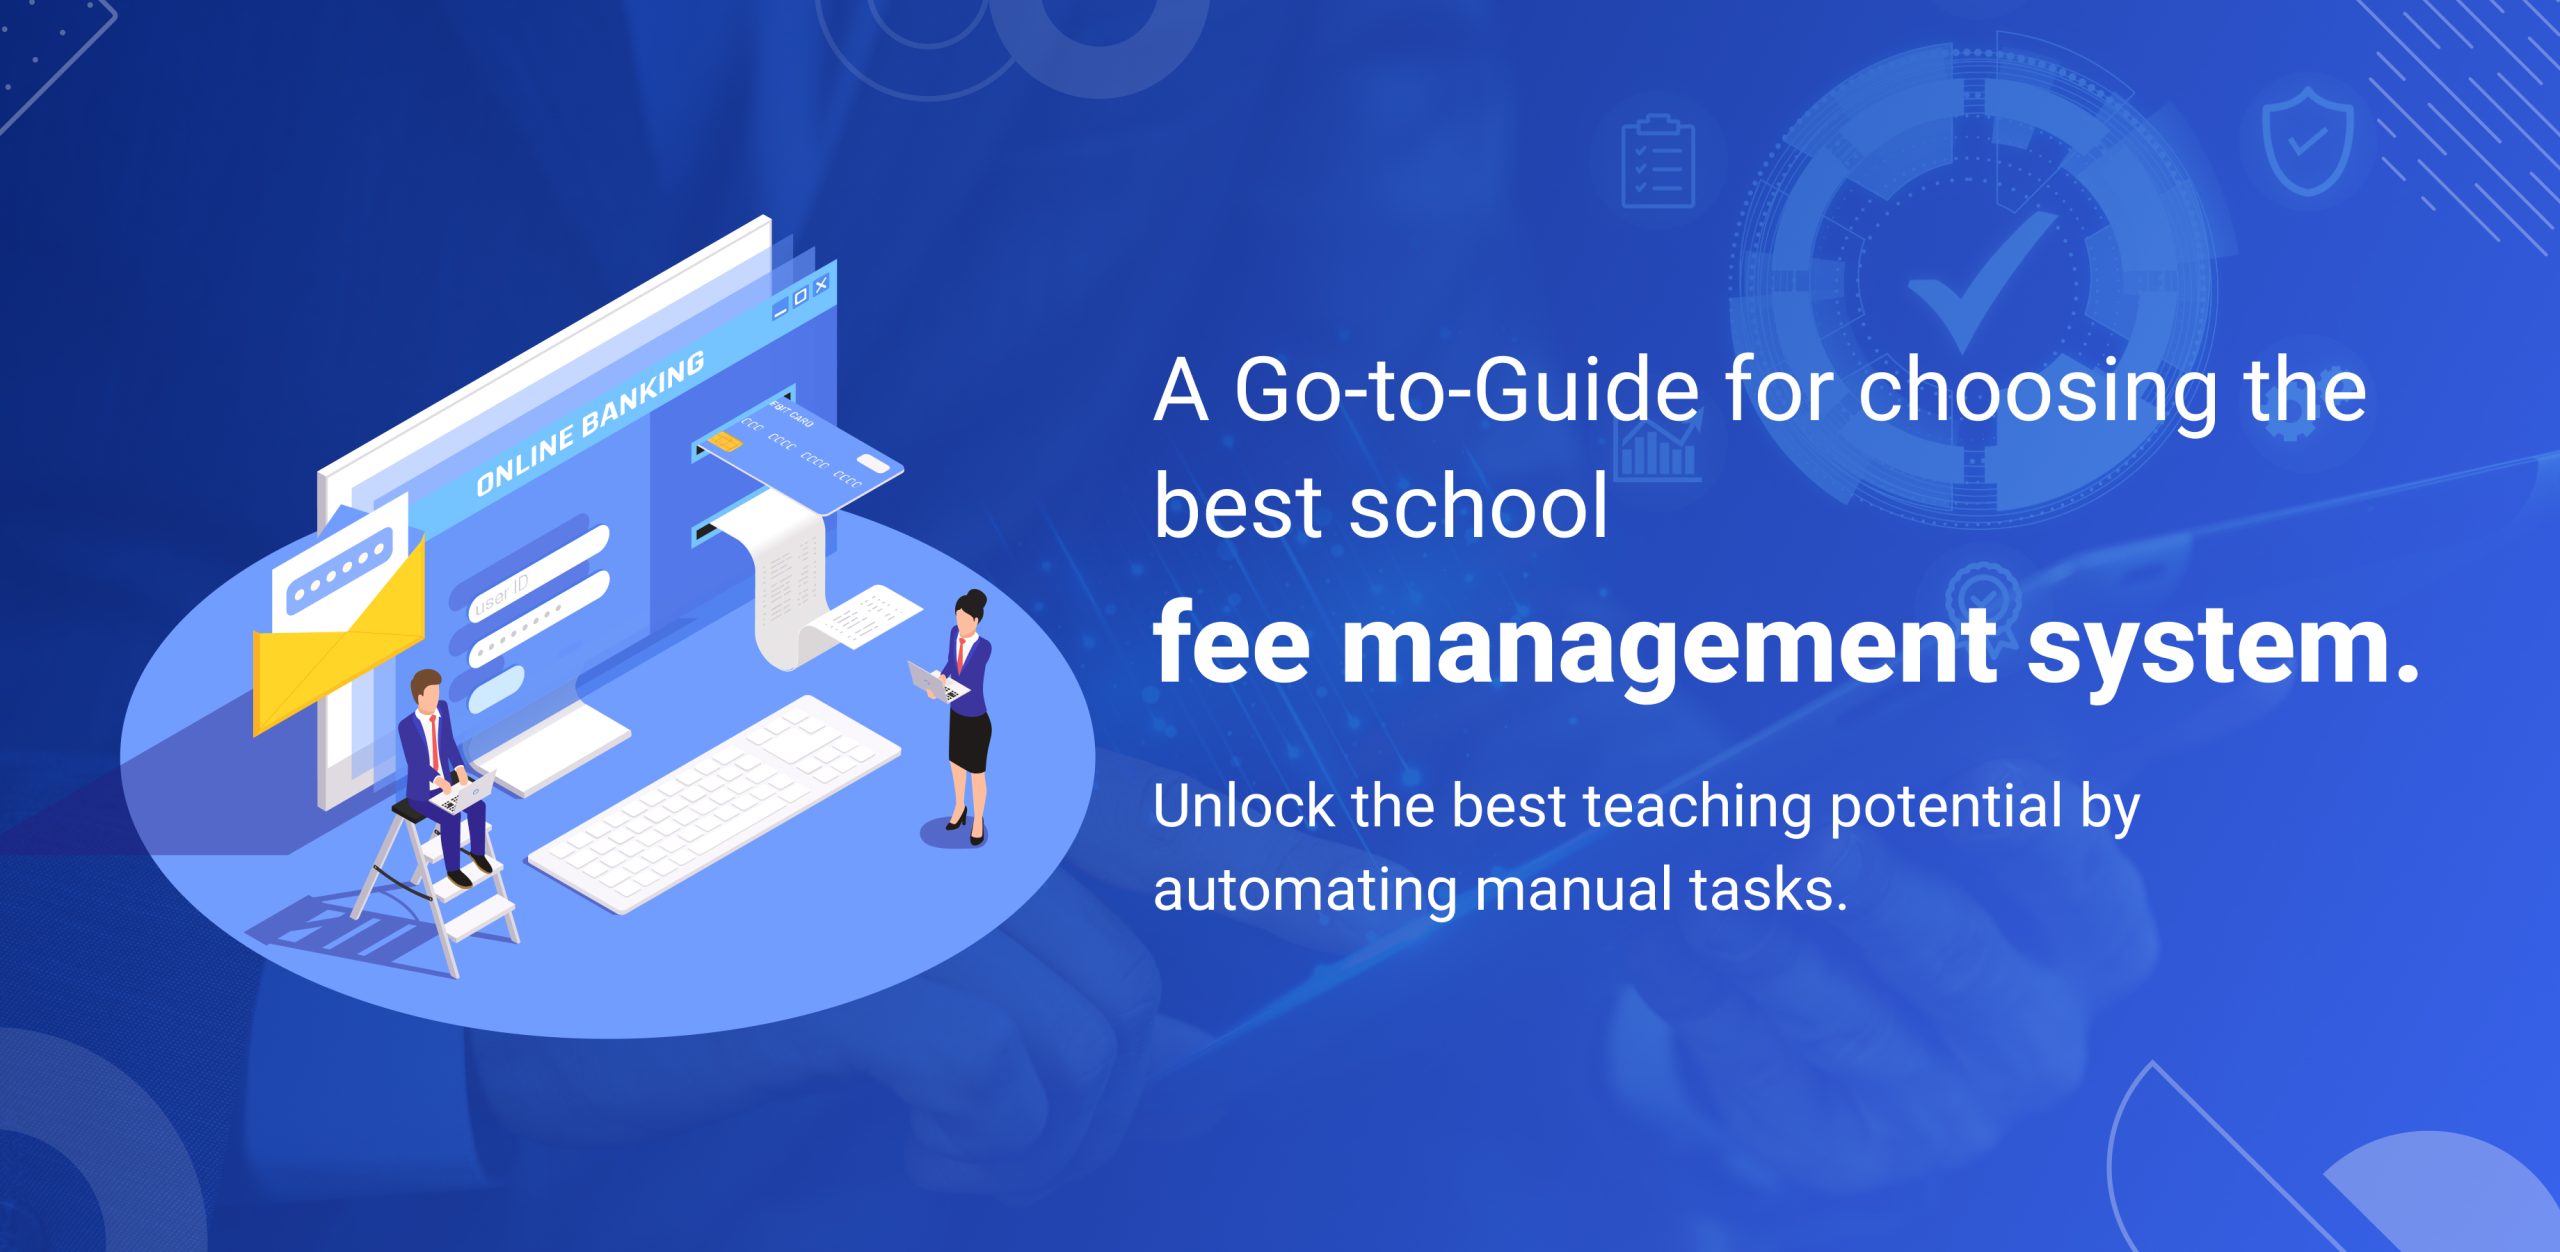 A Complete Guide to Choosing the Best School Fee Management System for Your School